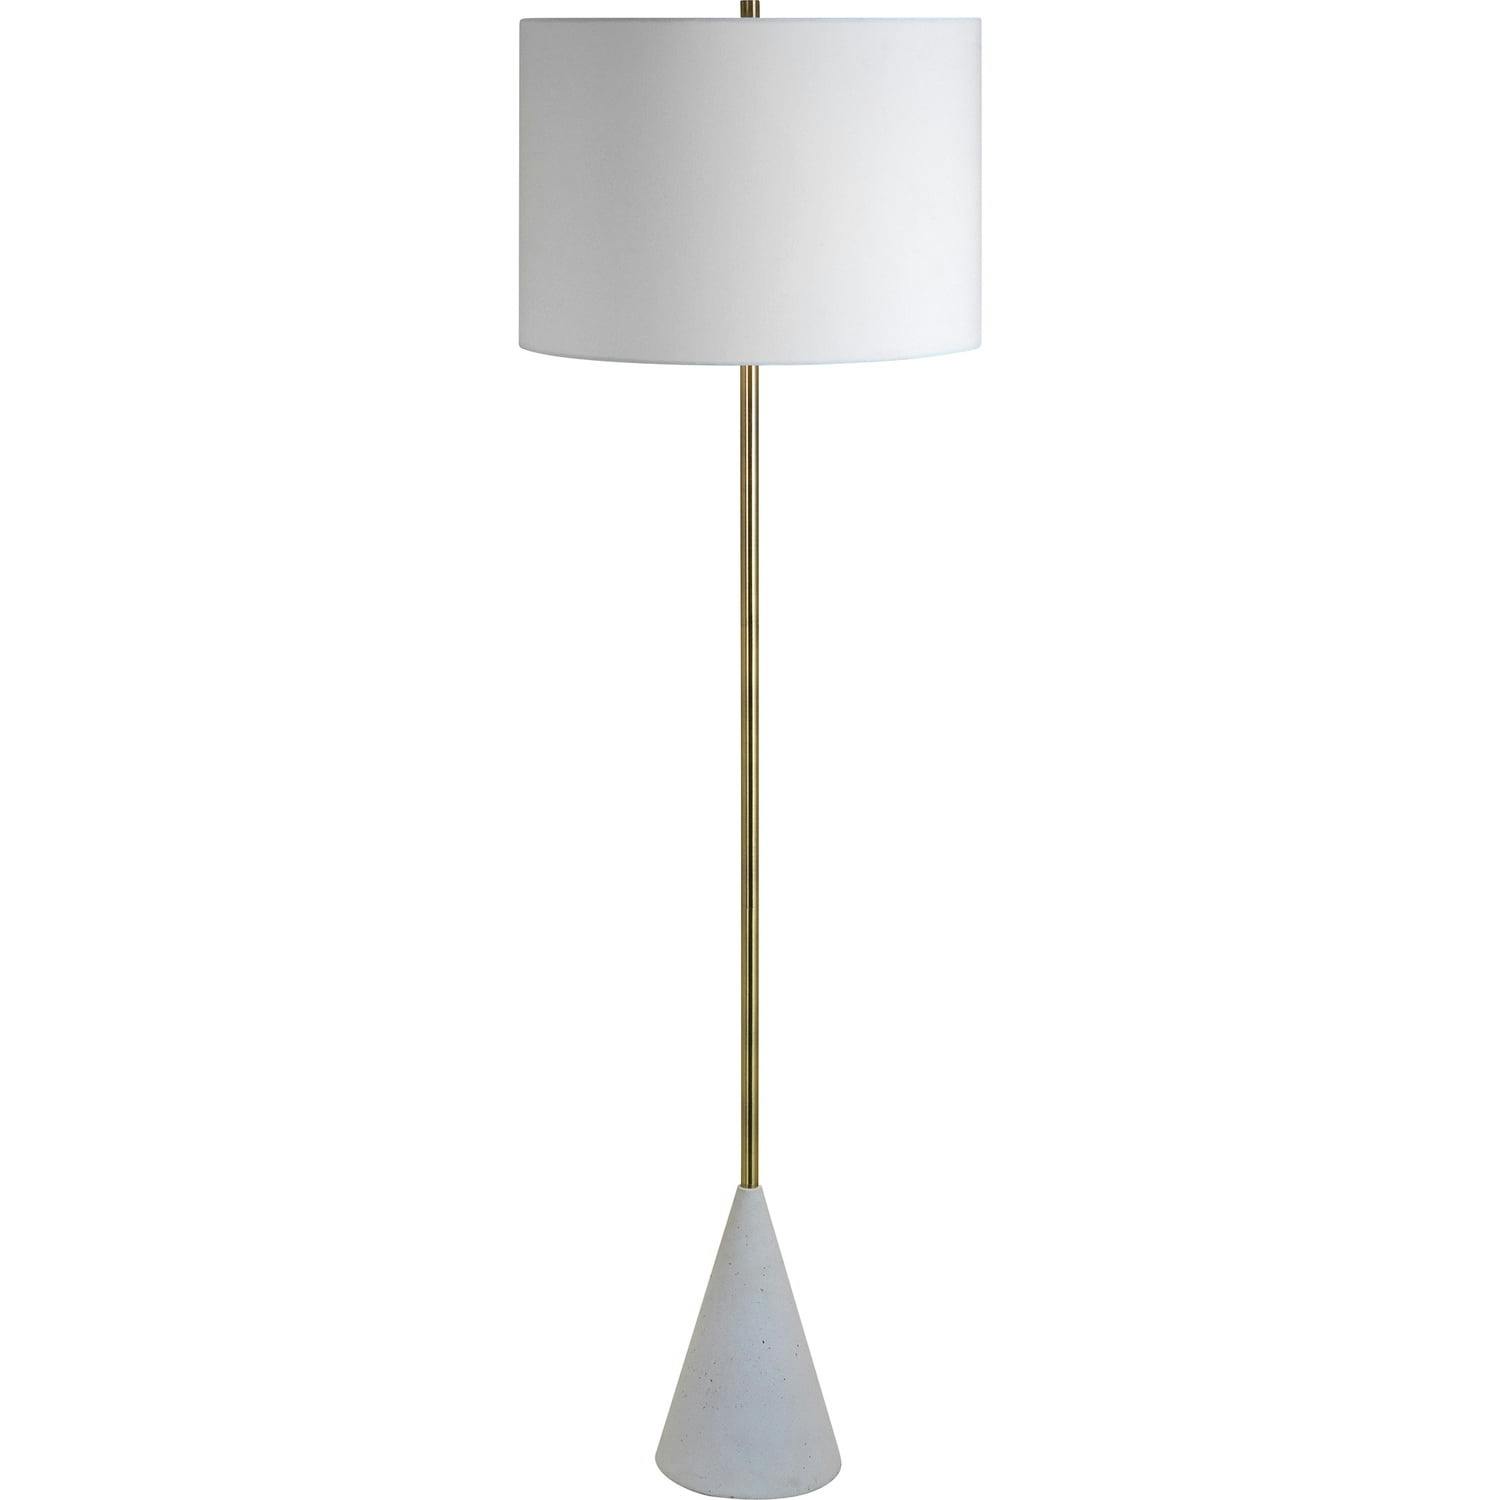 Antique Brushed Brass Adjustable Floor Lamp with Off-White Cotton Shade